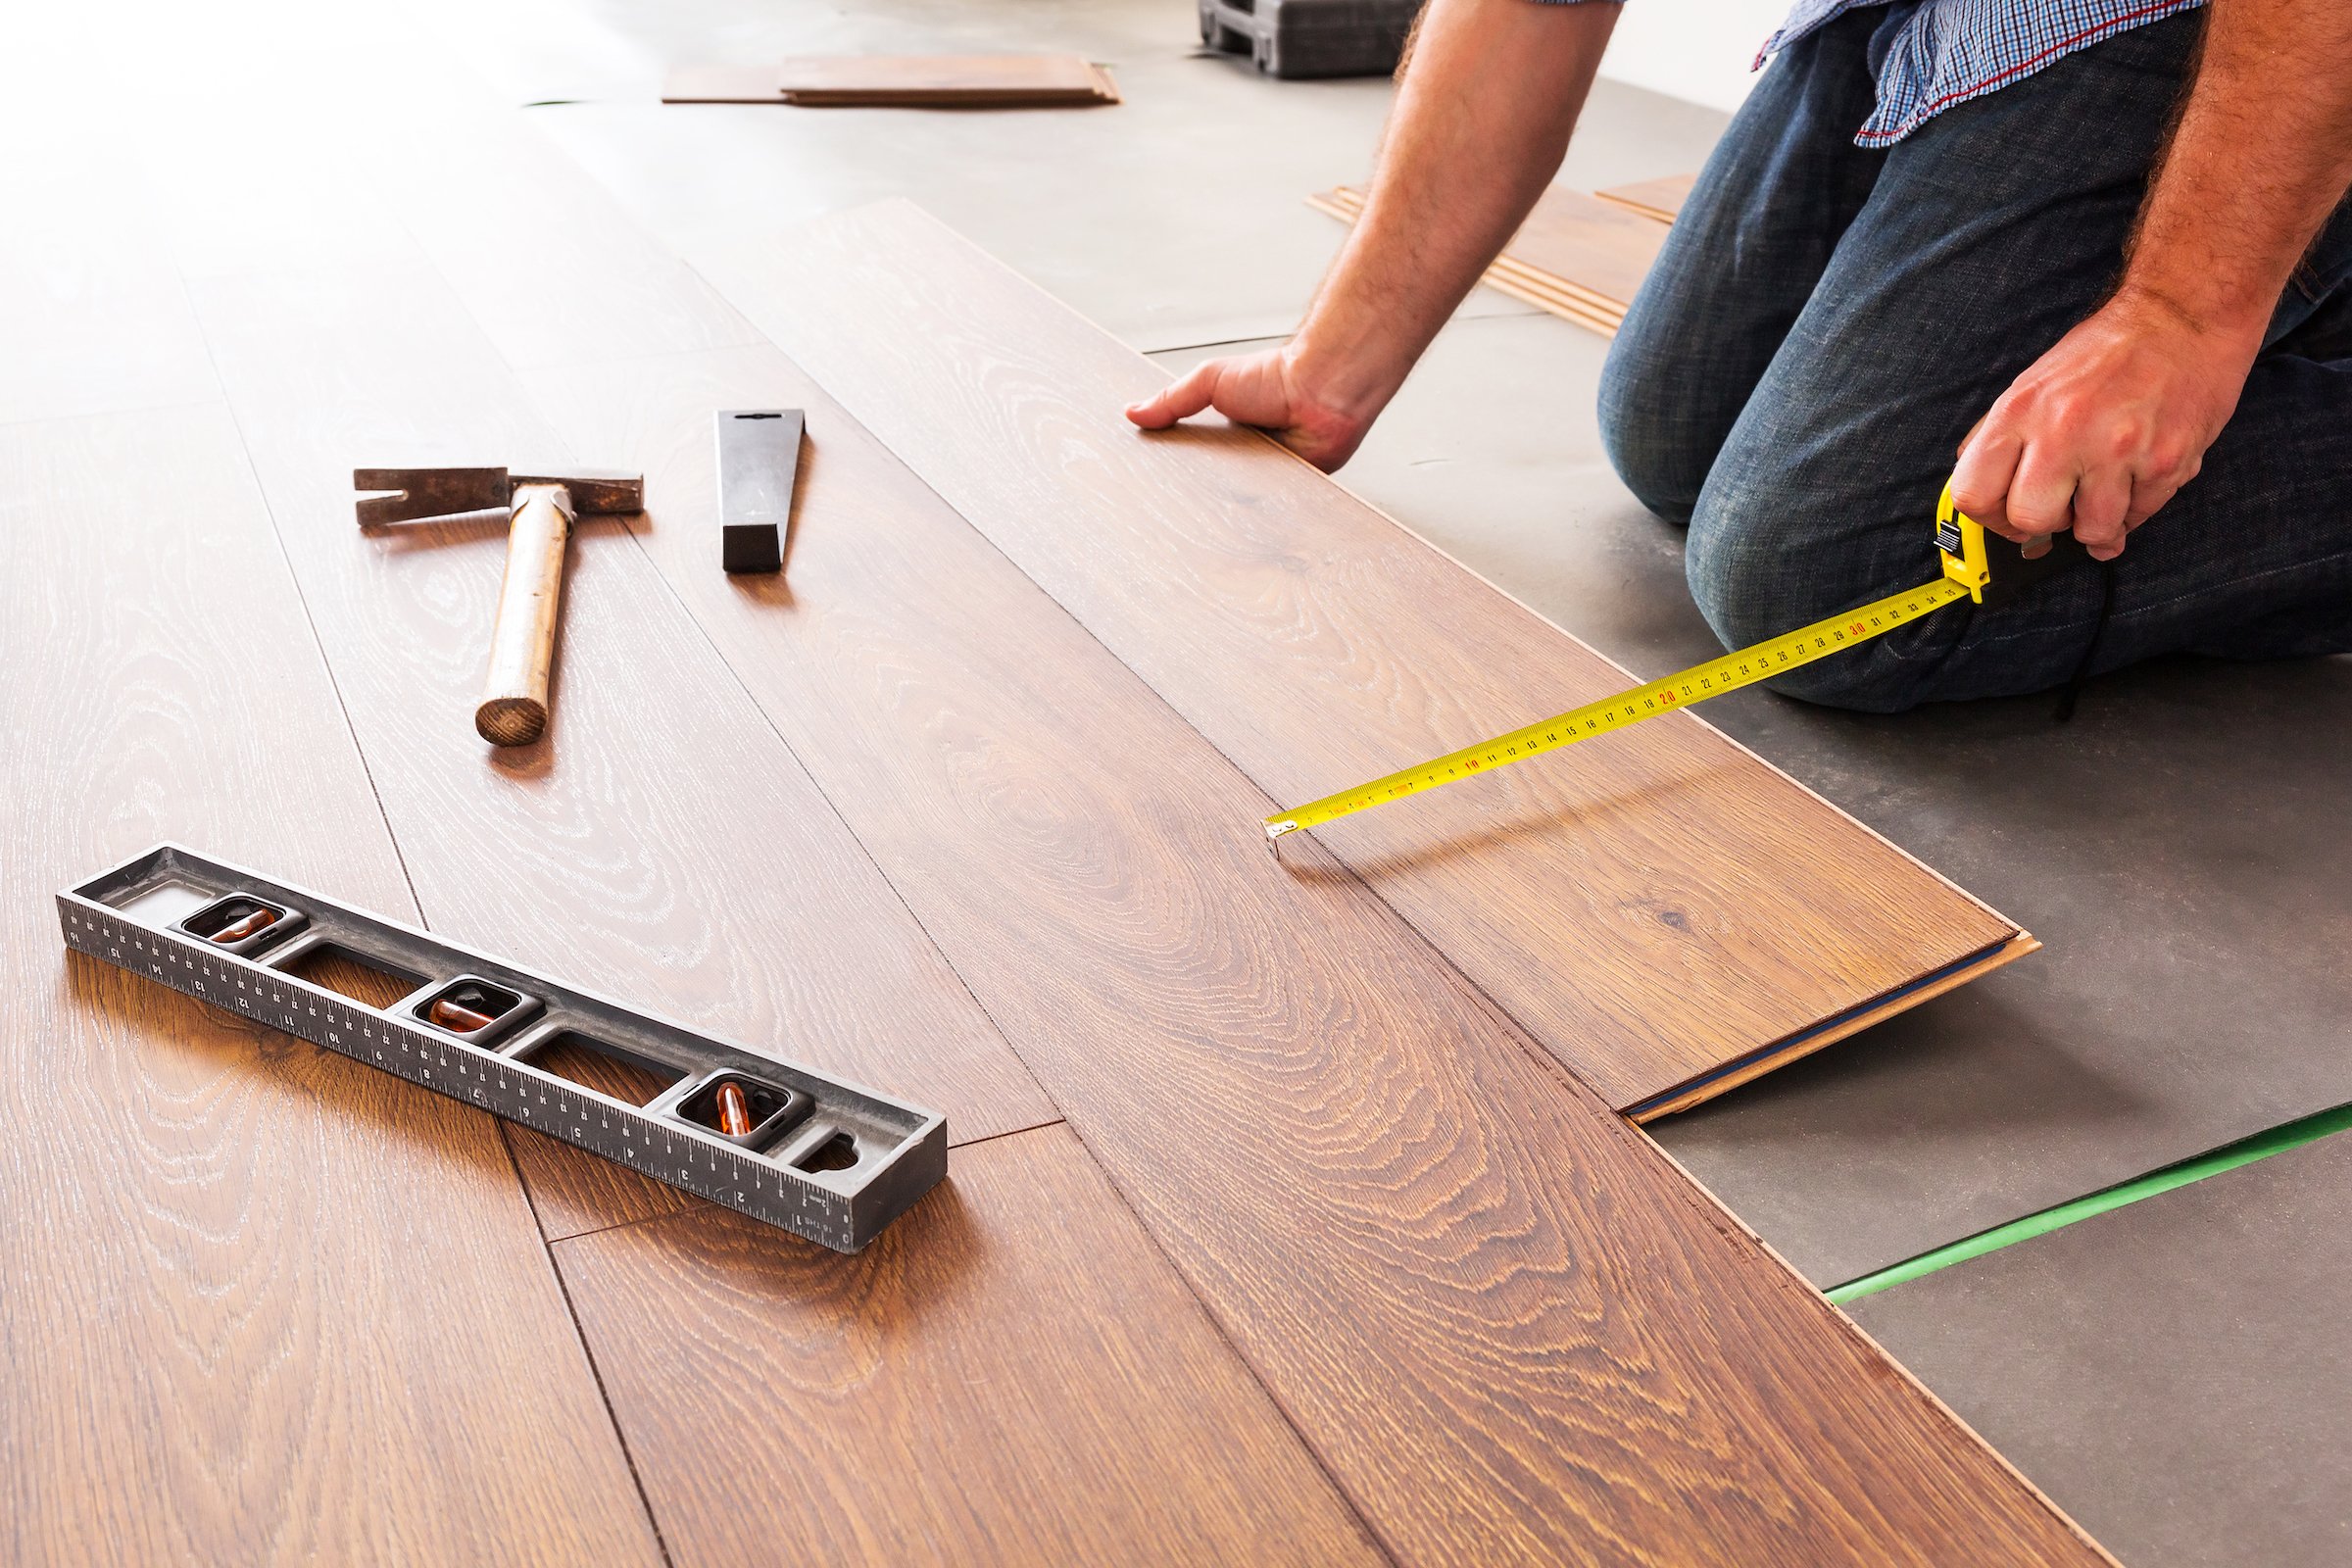 Laminate Flooring Installation Cost What's a Fair Price?